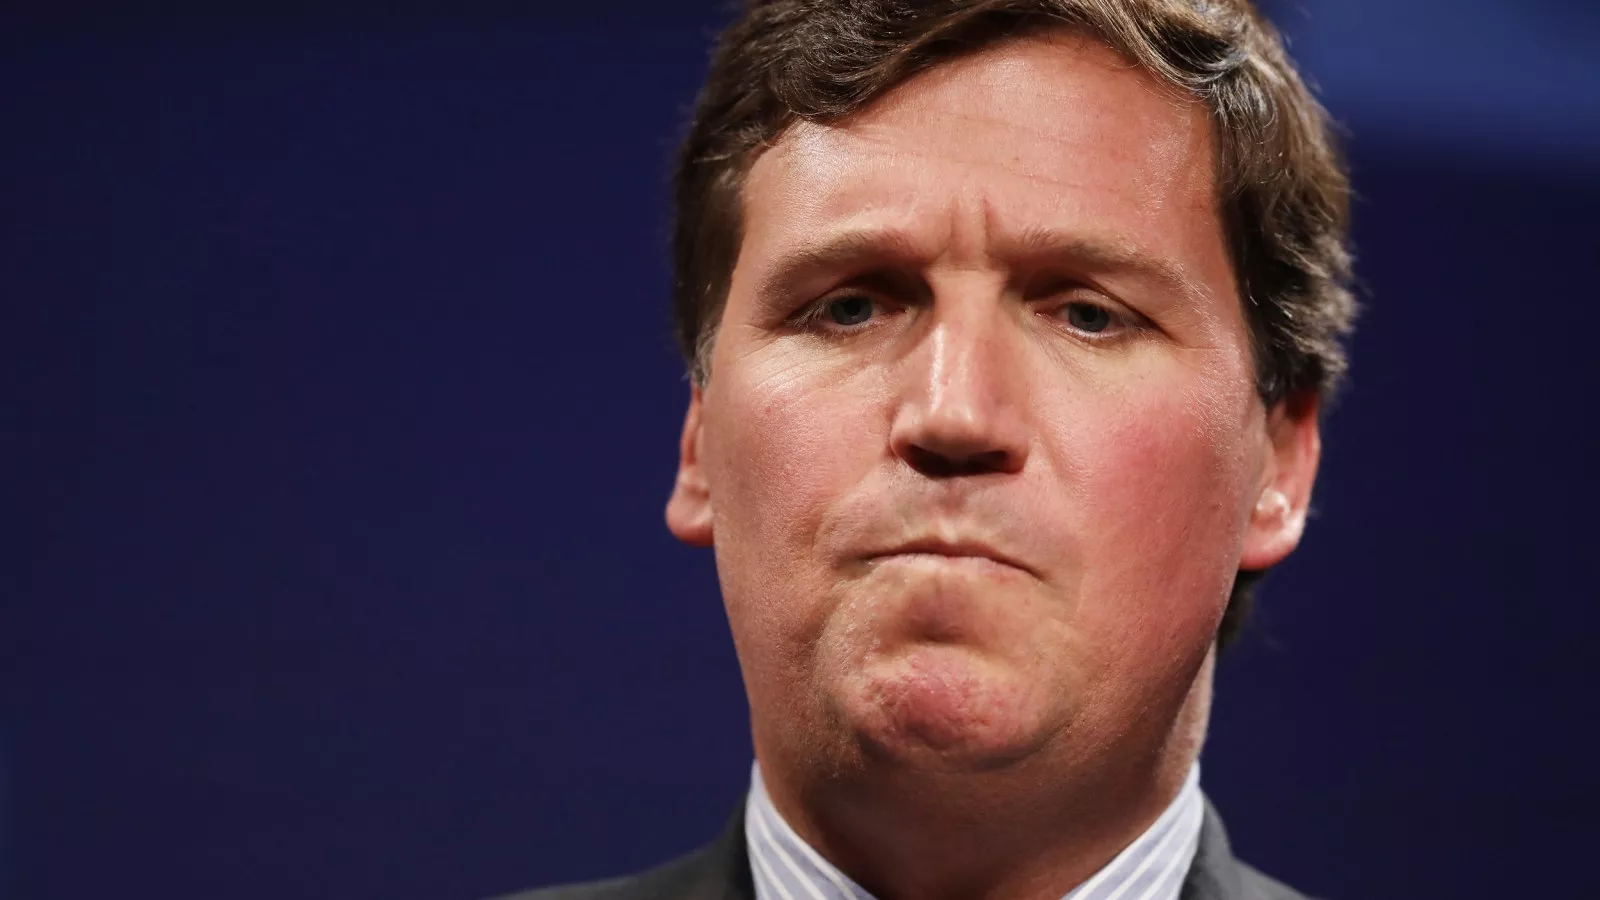 JFC he's worried about candy?': Tucker Carlson mocked after segment on  being 'turned off' by 'unsexy' M&Ms